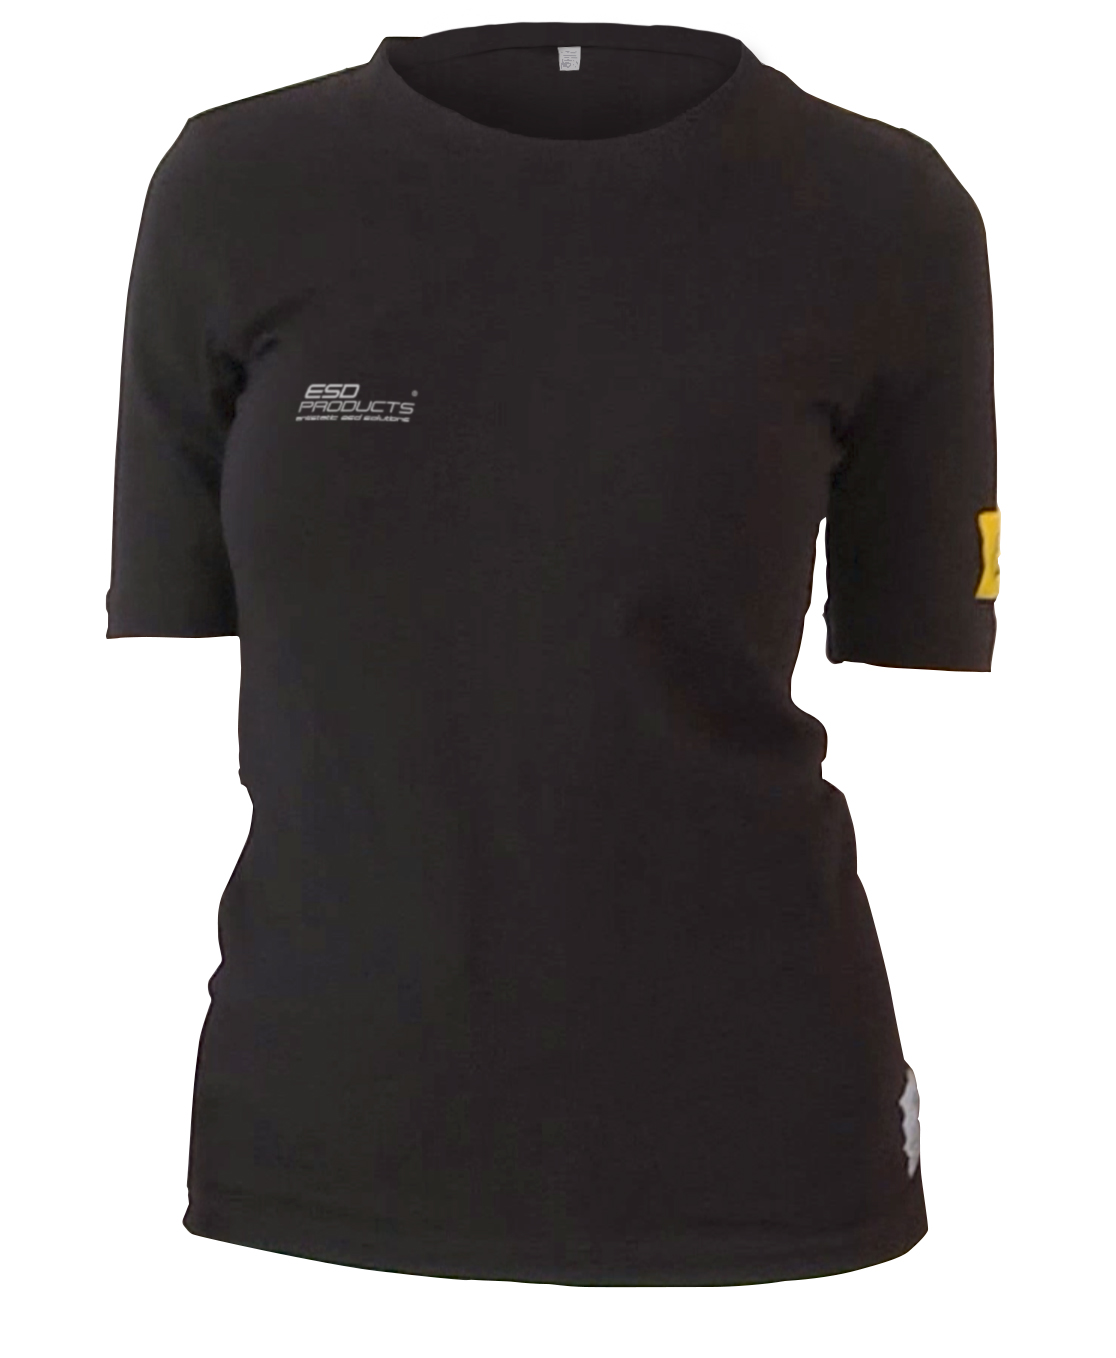 ESD Stretch T-Shirt Woman ATLY Short Sleeve Round Neck ALY20 Fabric Black Unisex 5XL - 473.ATLY-ALY2